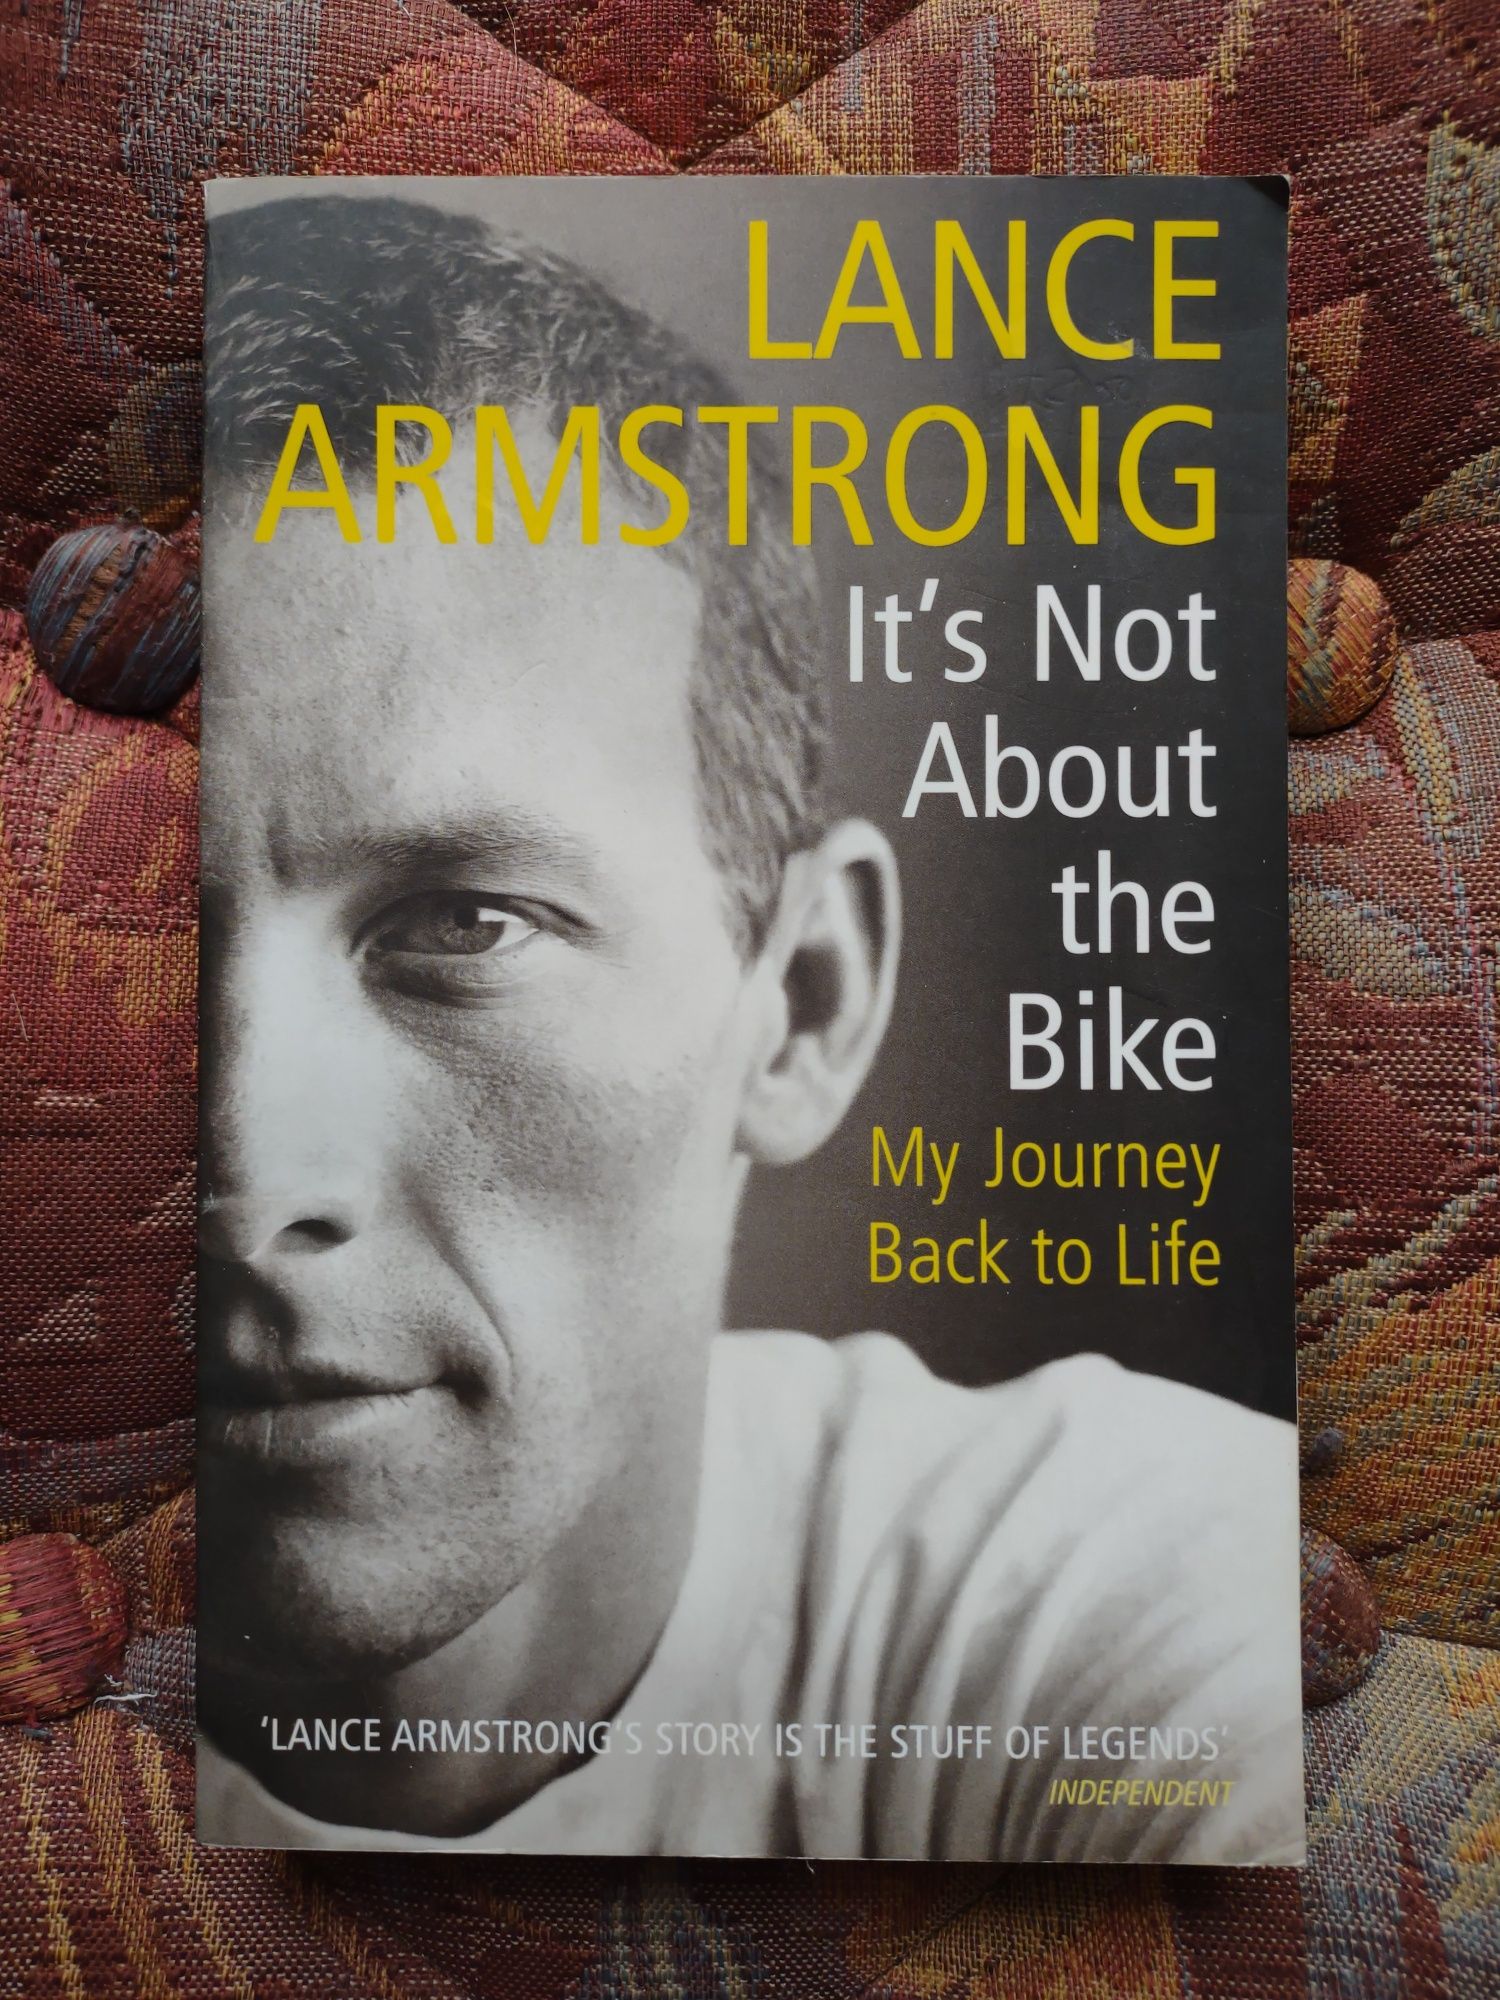 It's not about the bike. Lance Armstrong